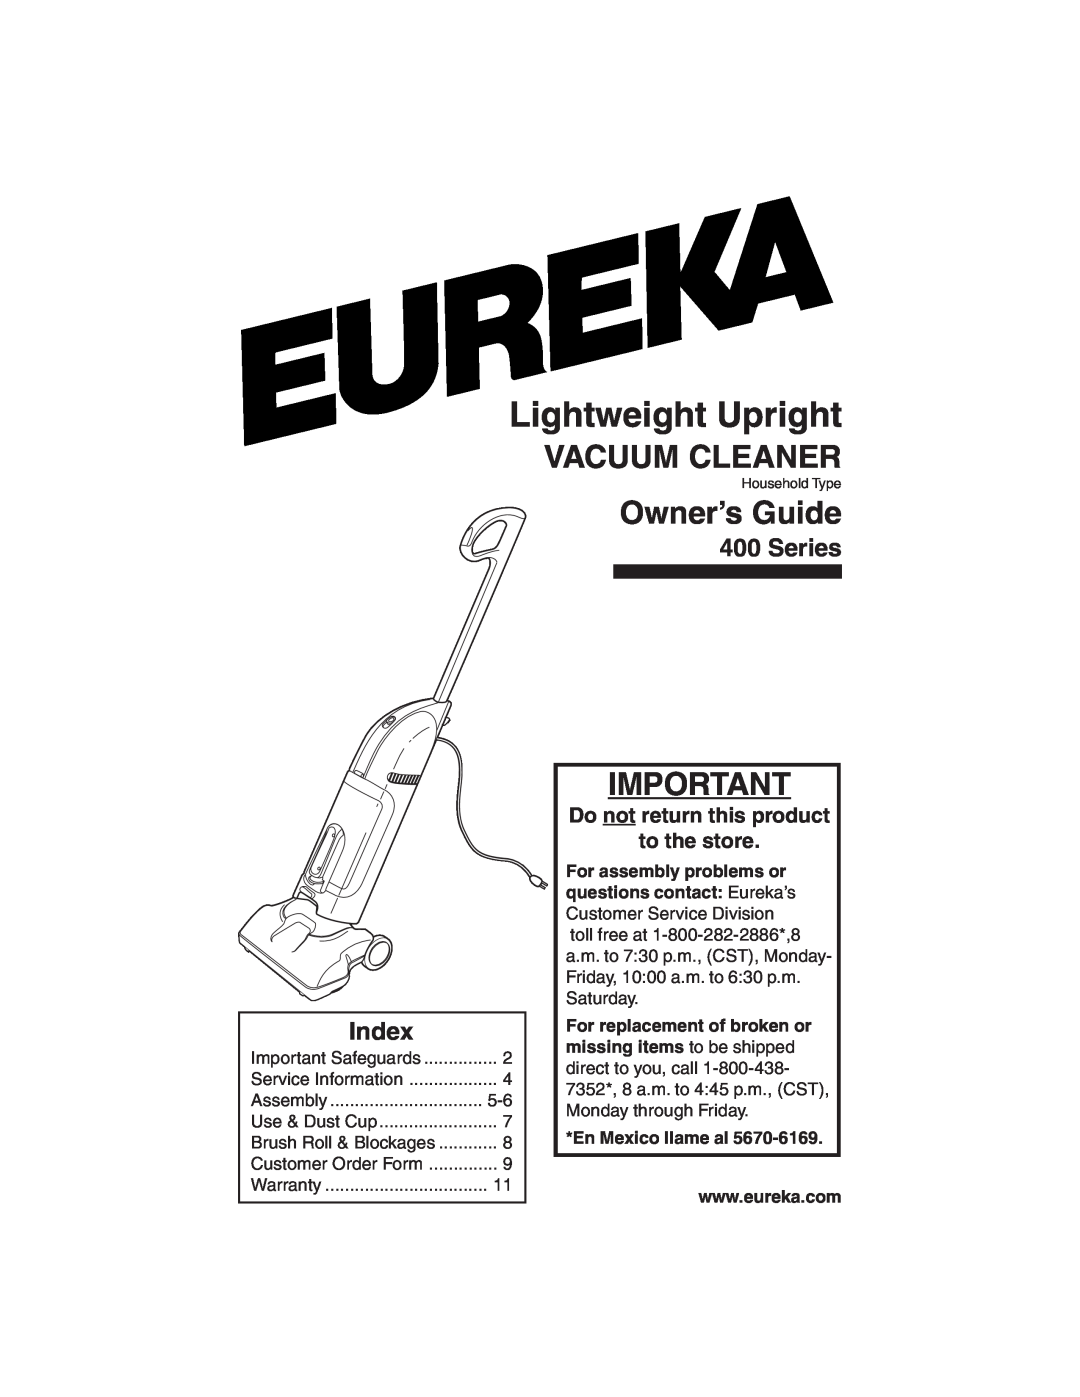 Eureka 400 warranty Lightweight Upright, Index, Series, Do not return this product to the store, Vacuum Cleaner 